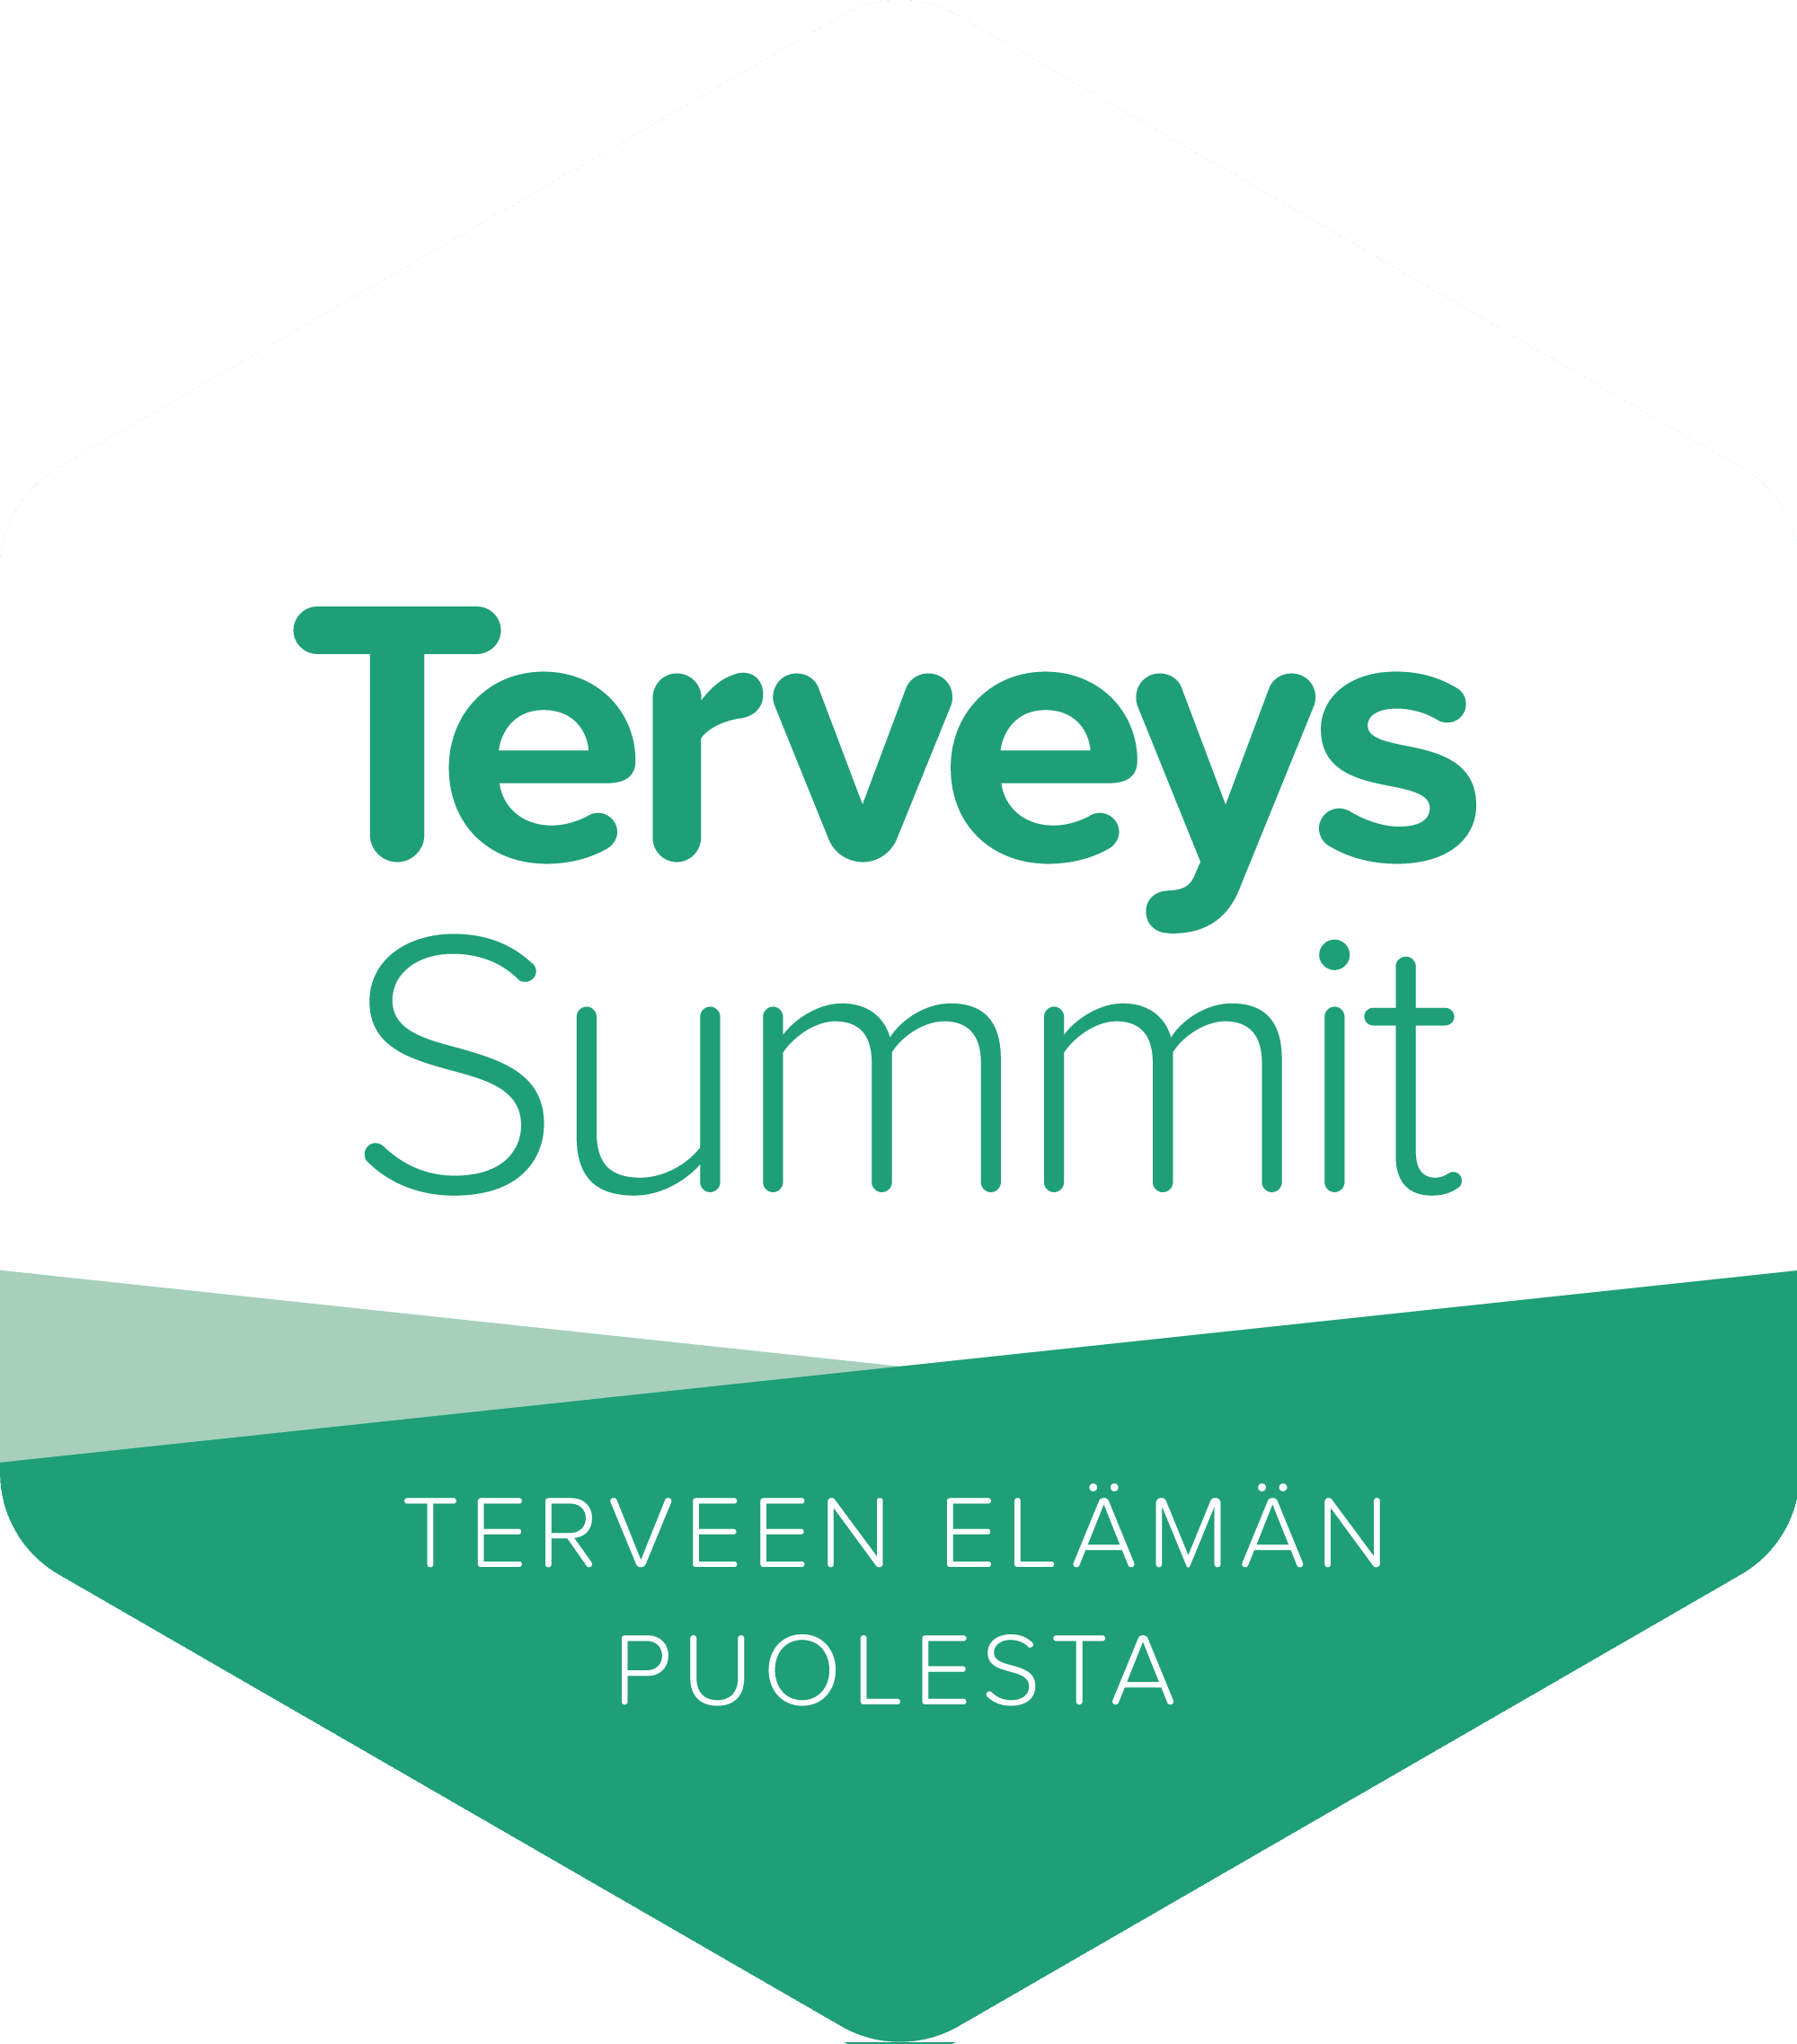 TerveysSummit - the latest health knowledge from top experts for all Finns